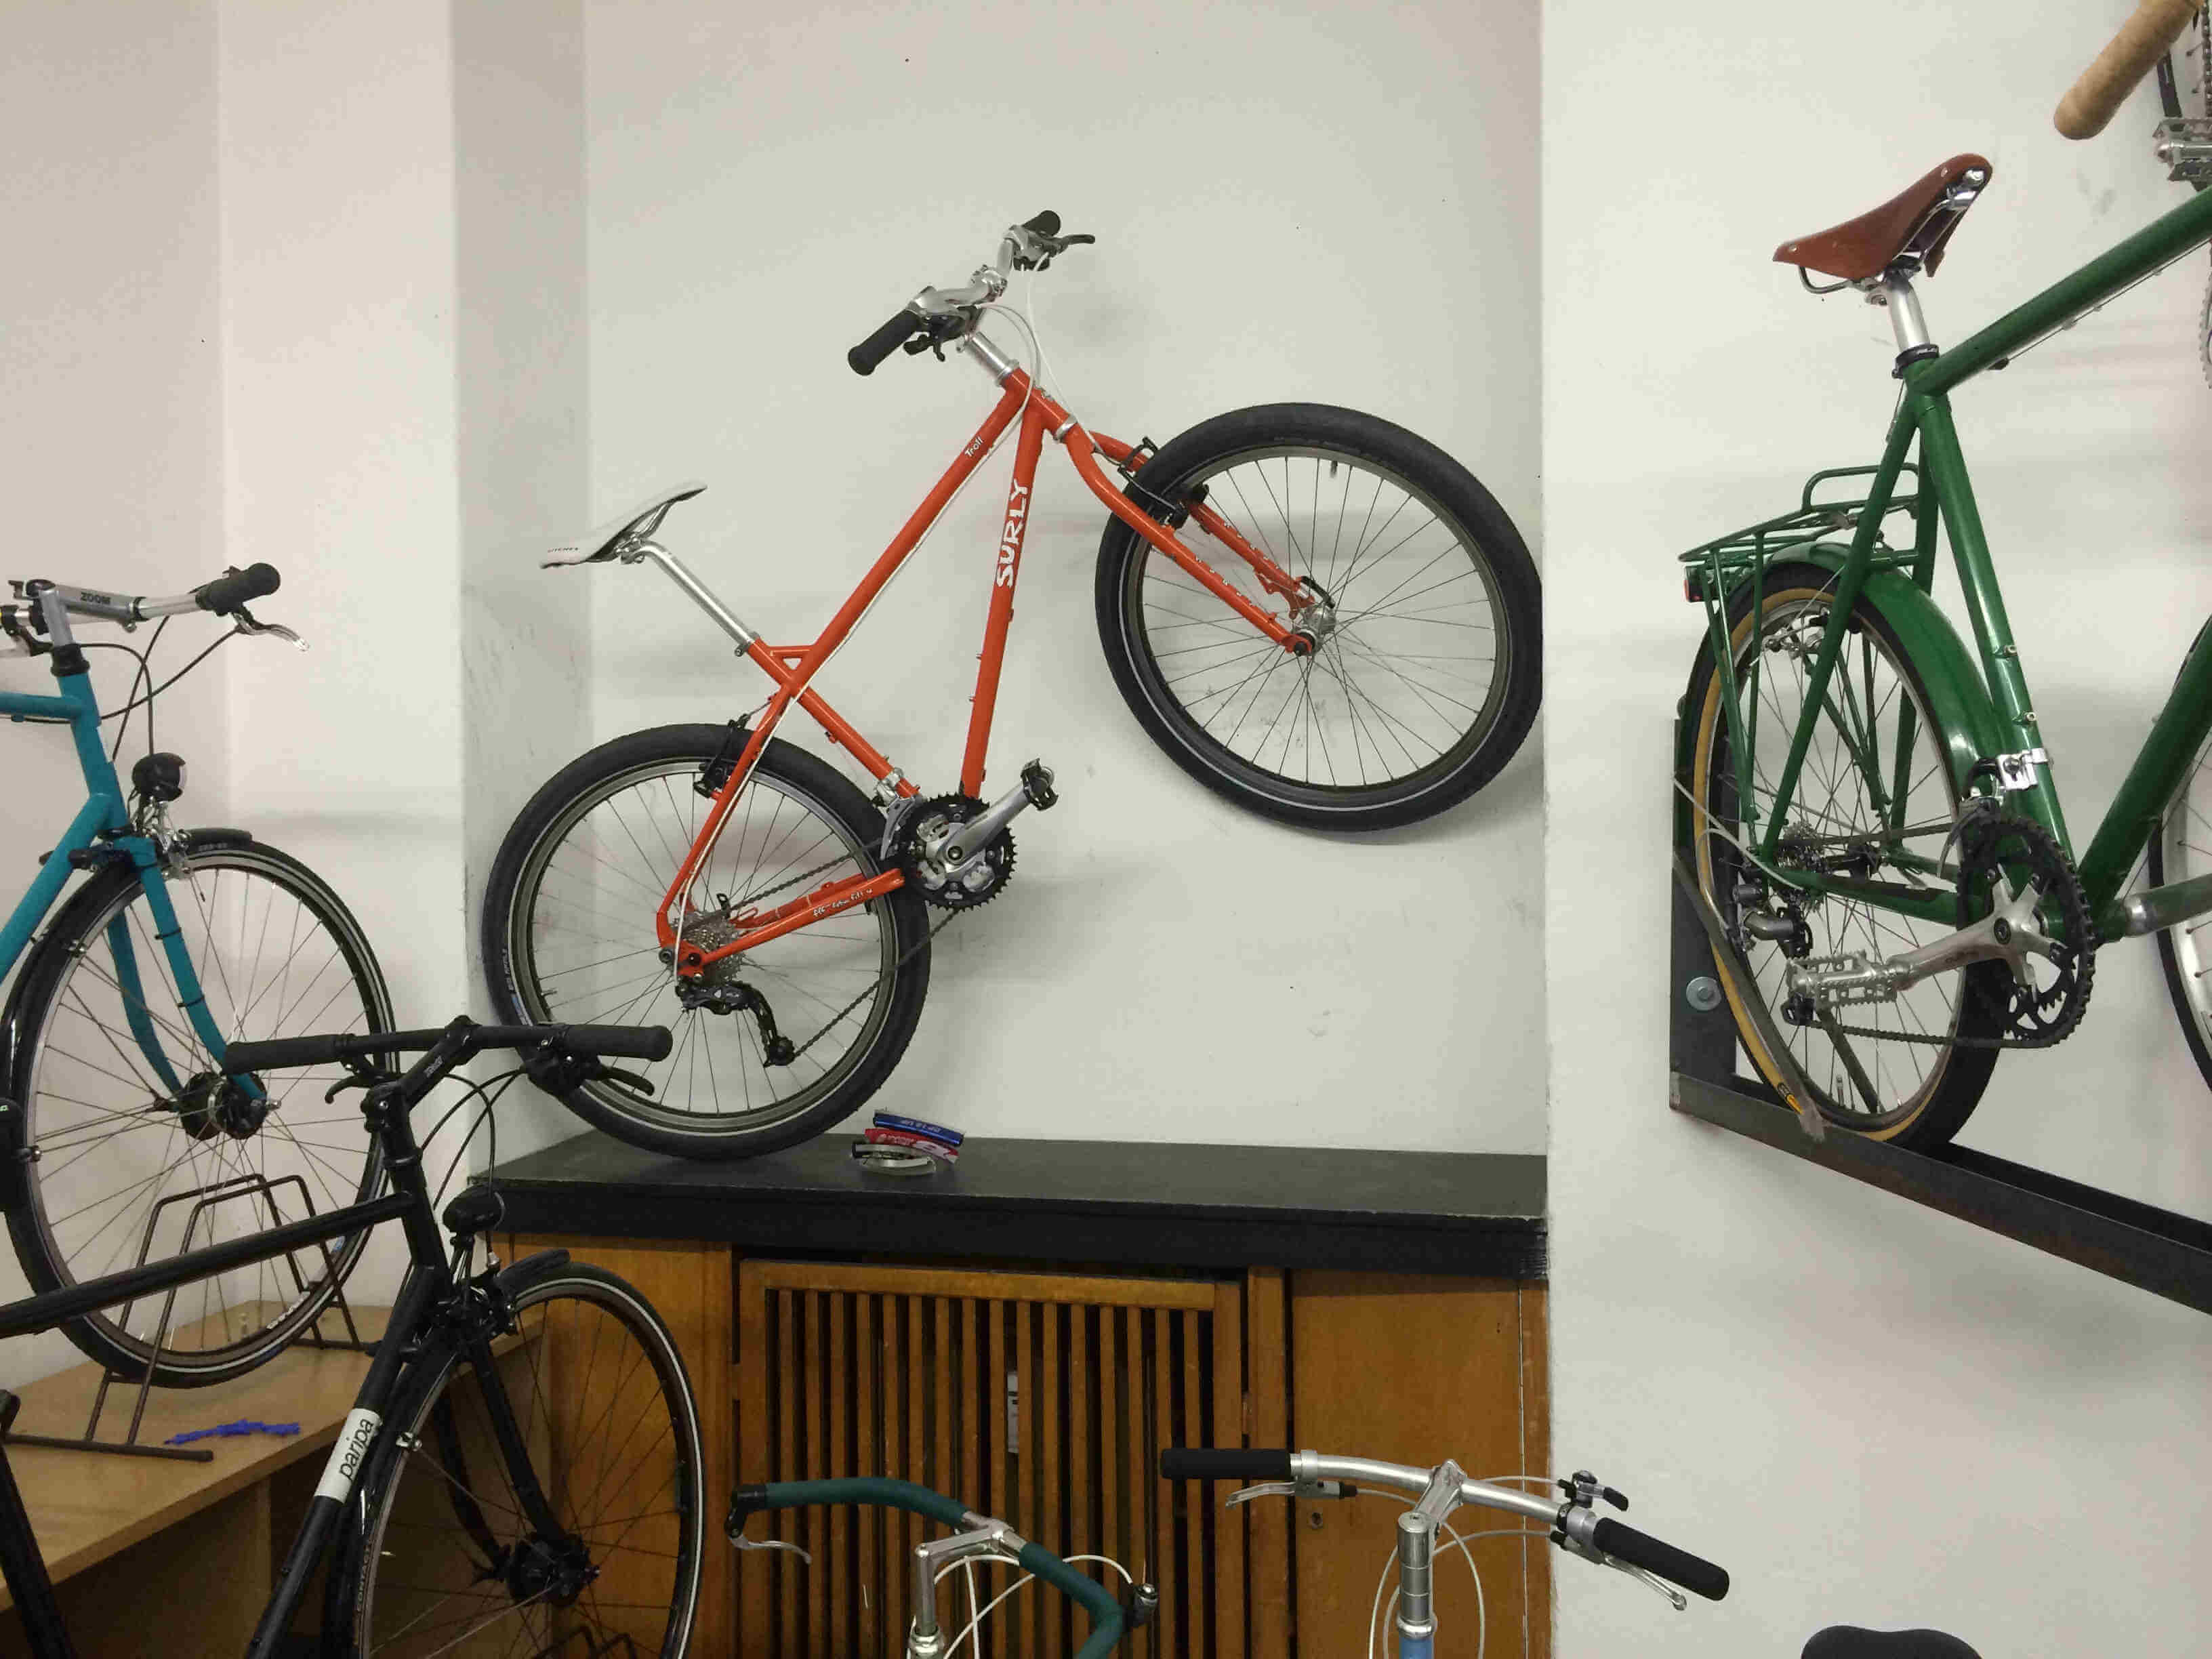 Right side view of an orange Surly Troll bike, wedged between 2 walls with front wheel propped up, in a bike shop room